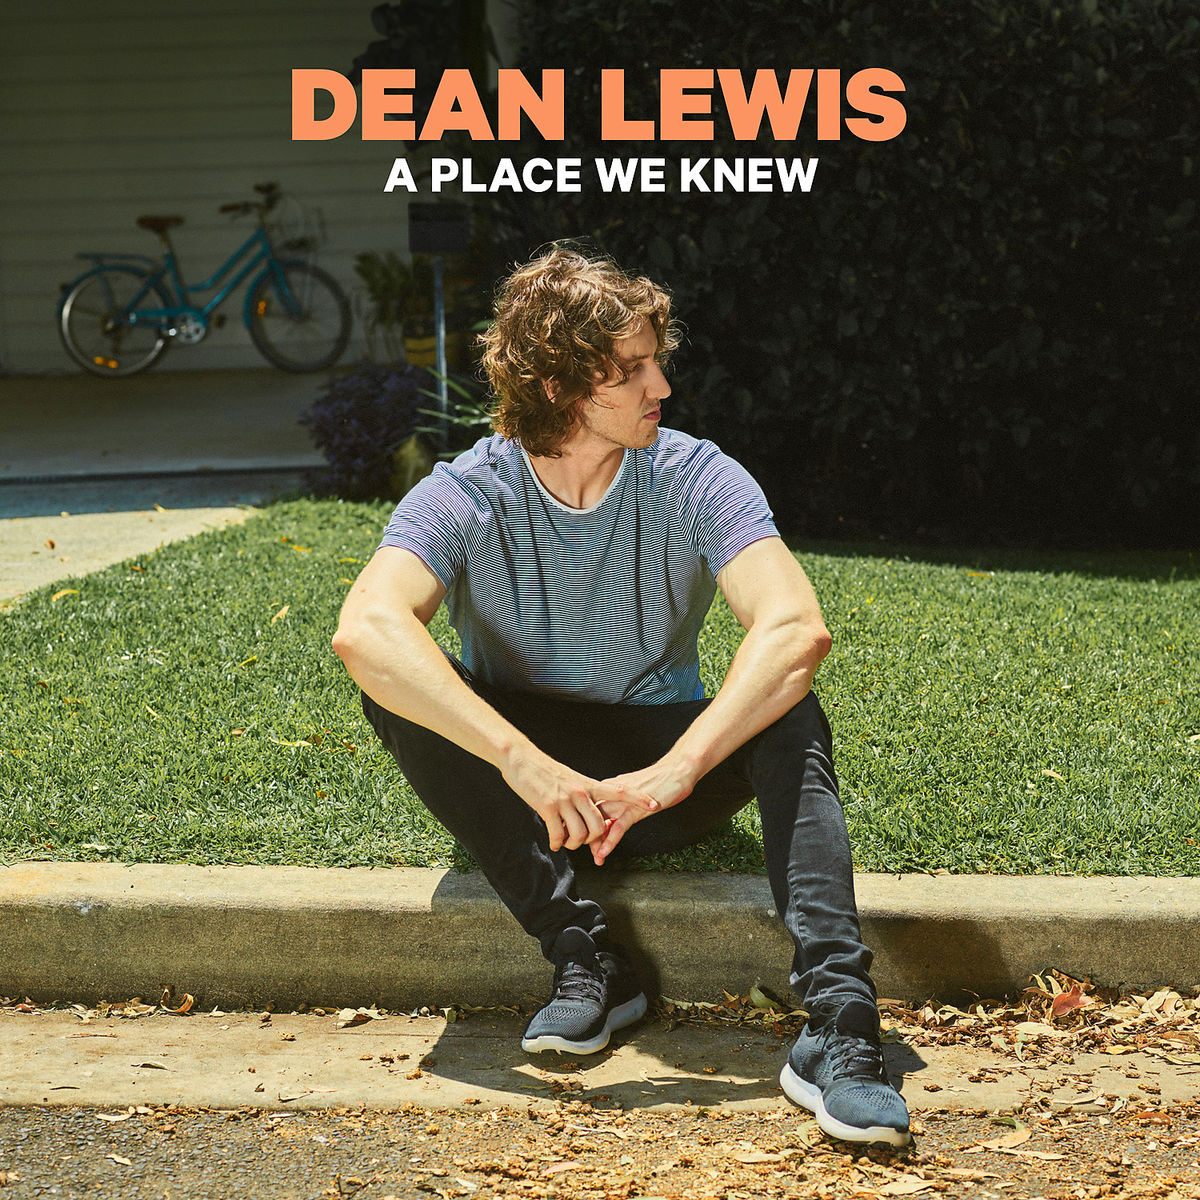 Dean Lewis - “A Place We Knew“ (Island/Universal) 